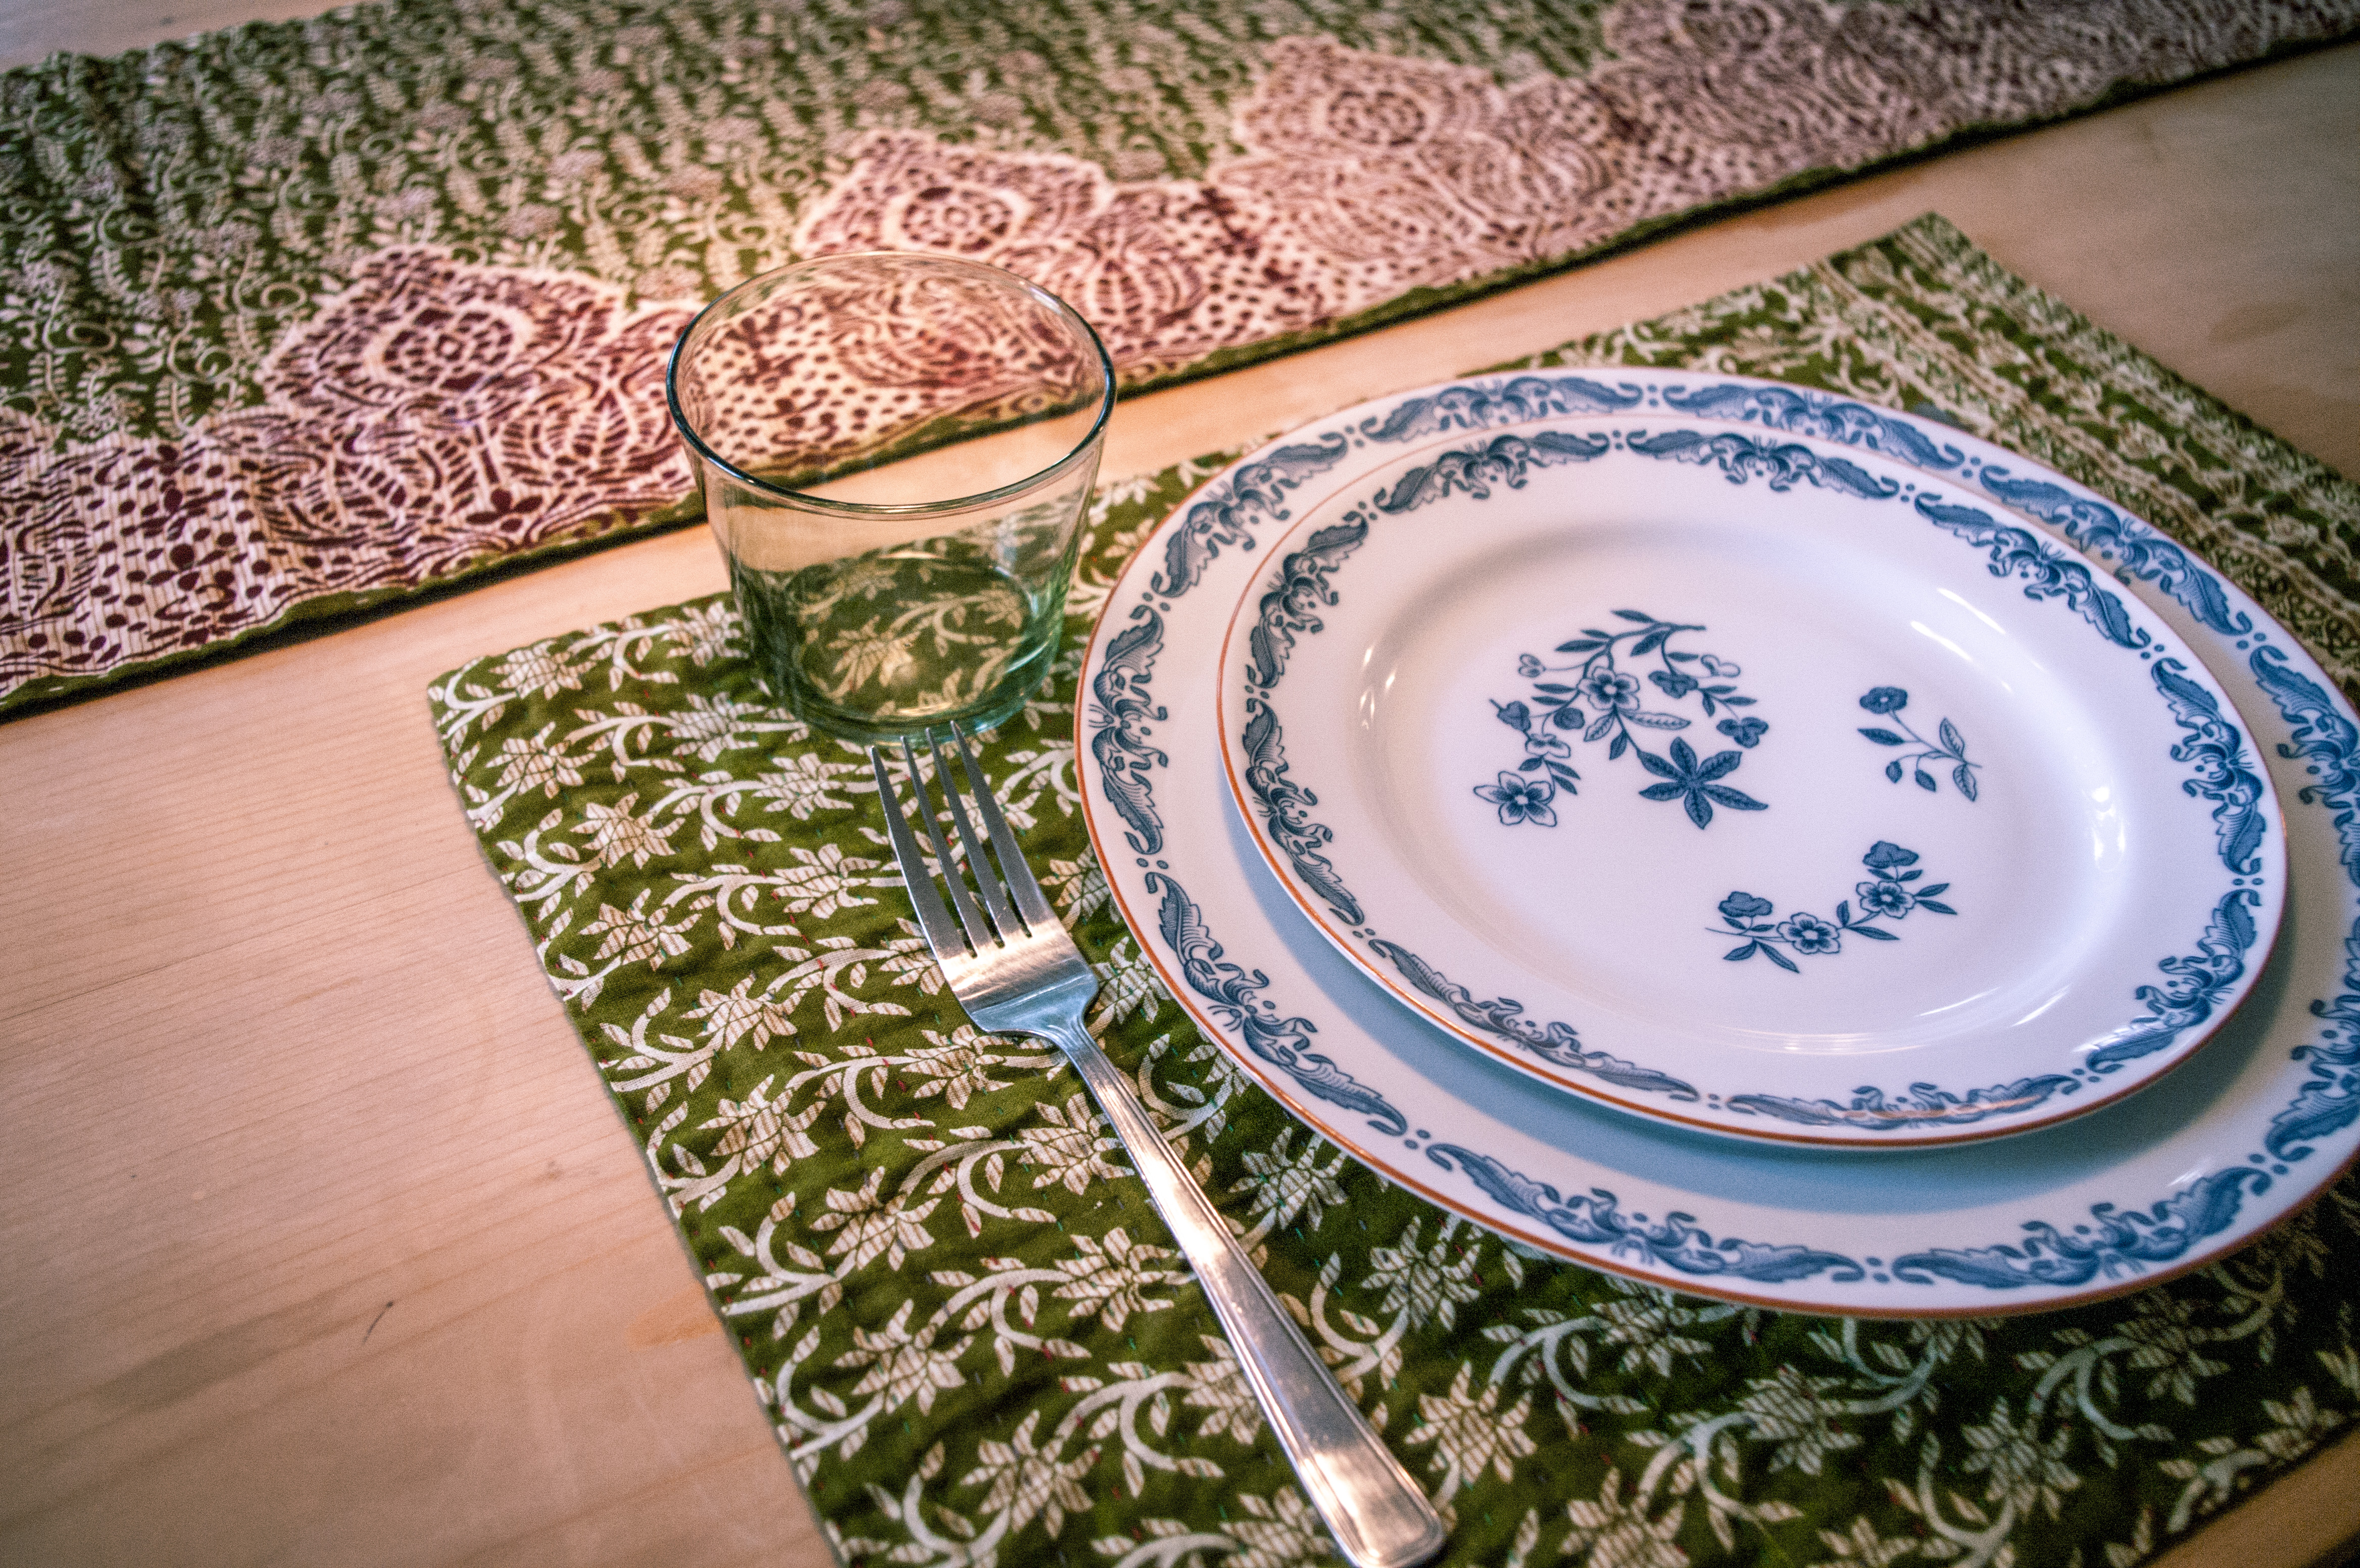 Kantha stitched place mat makes every meal special